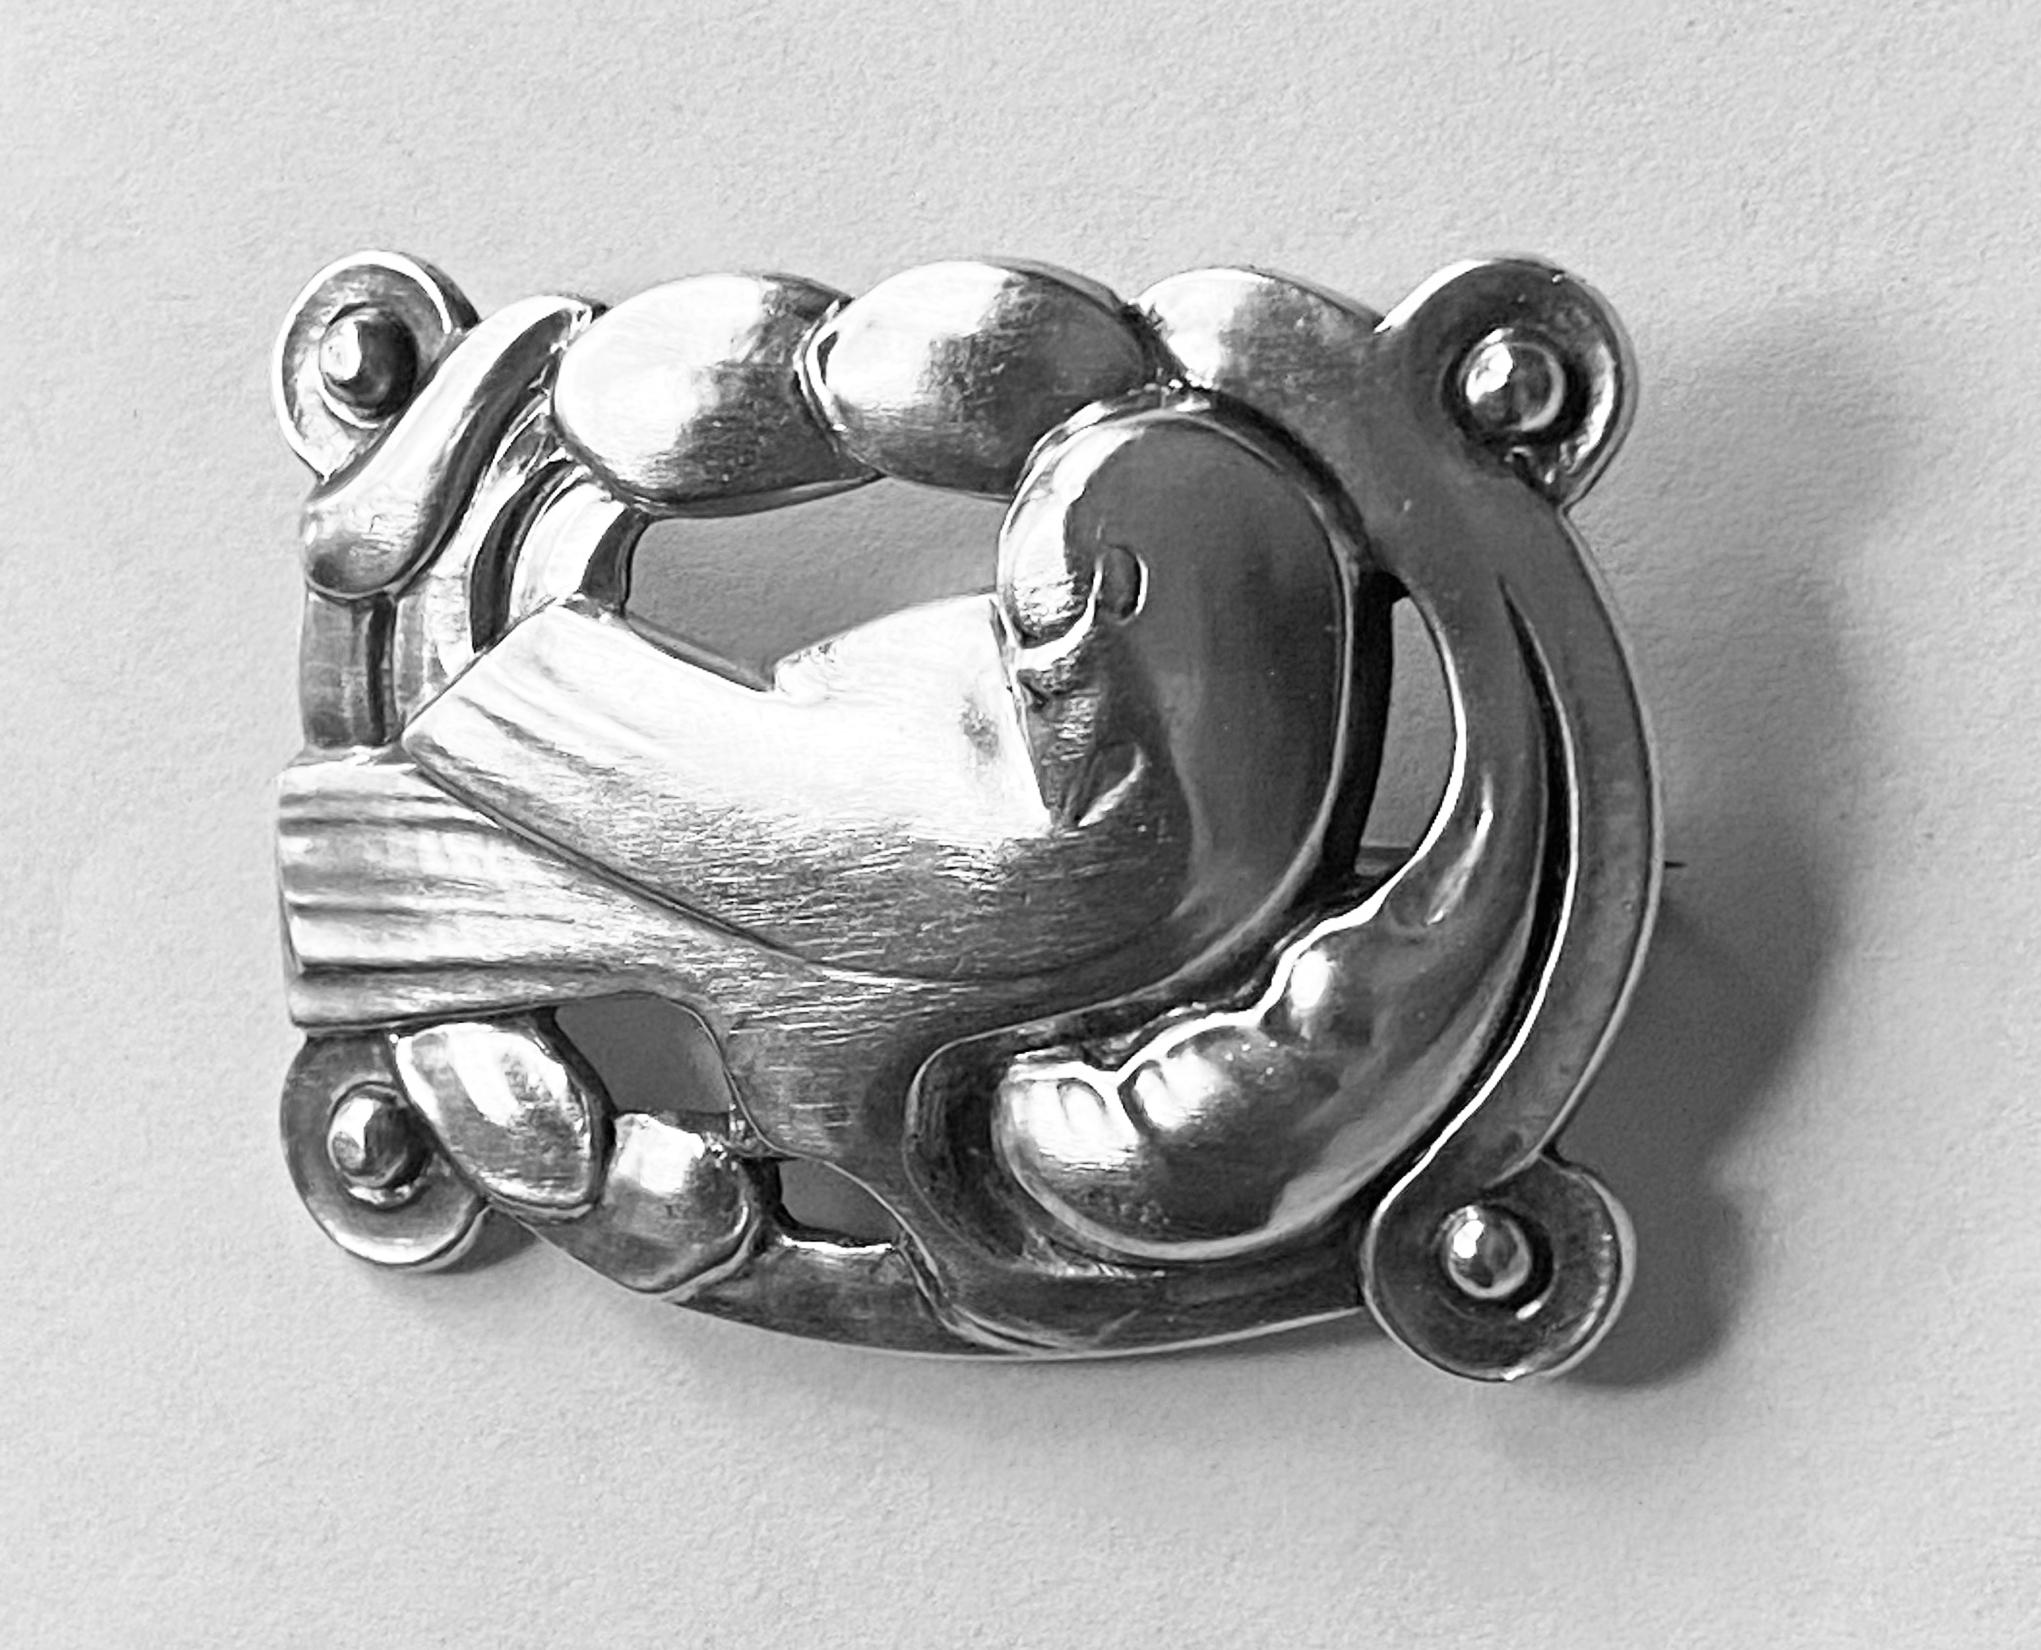 Early Georg Jensen Silver Dove Brooch Denmark C.1925. The bird set in a rectangular foliate frame with silver beads at each corner, Jensen oval hallmark and 830 and Importe de Danmark 209. Measures: 1.75 x 1 .25 inches. Weight: 11.36 grams. The dove